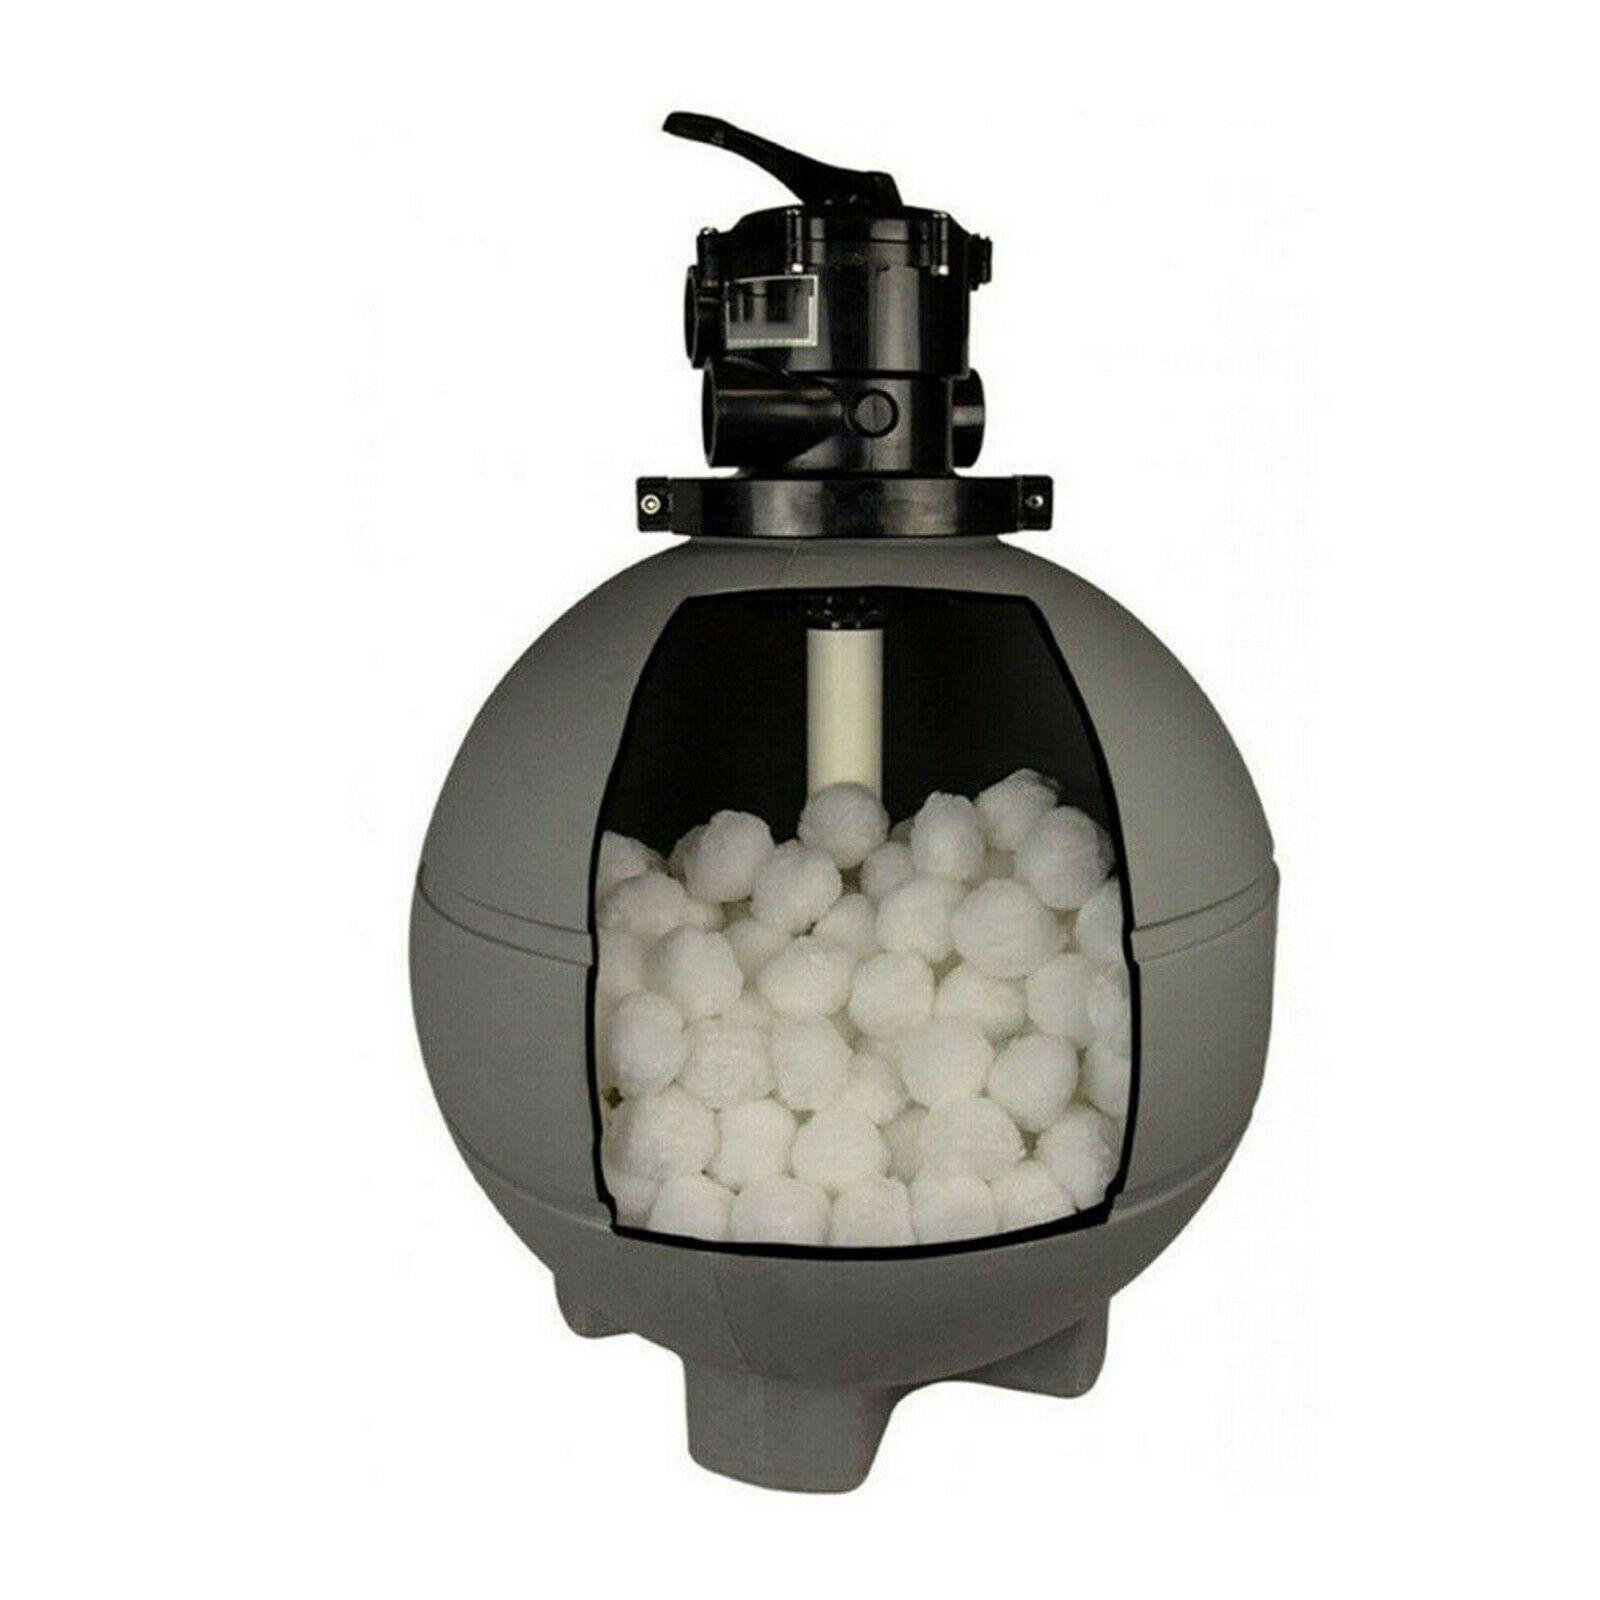 800g Sand Filter Balls Polysphere Cleaning For Swimming Pool Sparesbarn